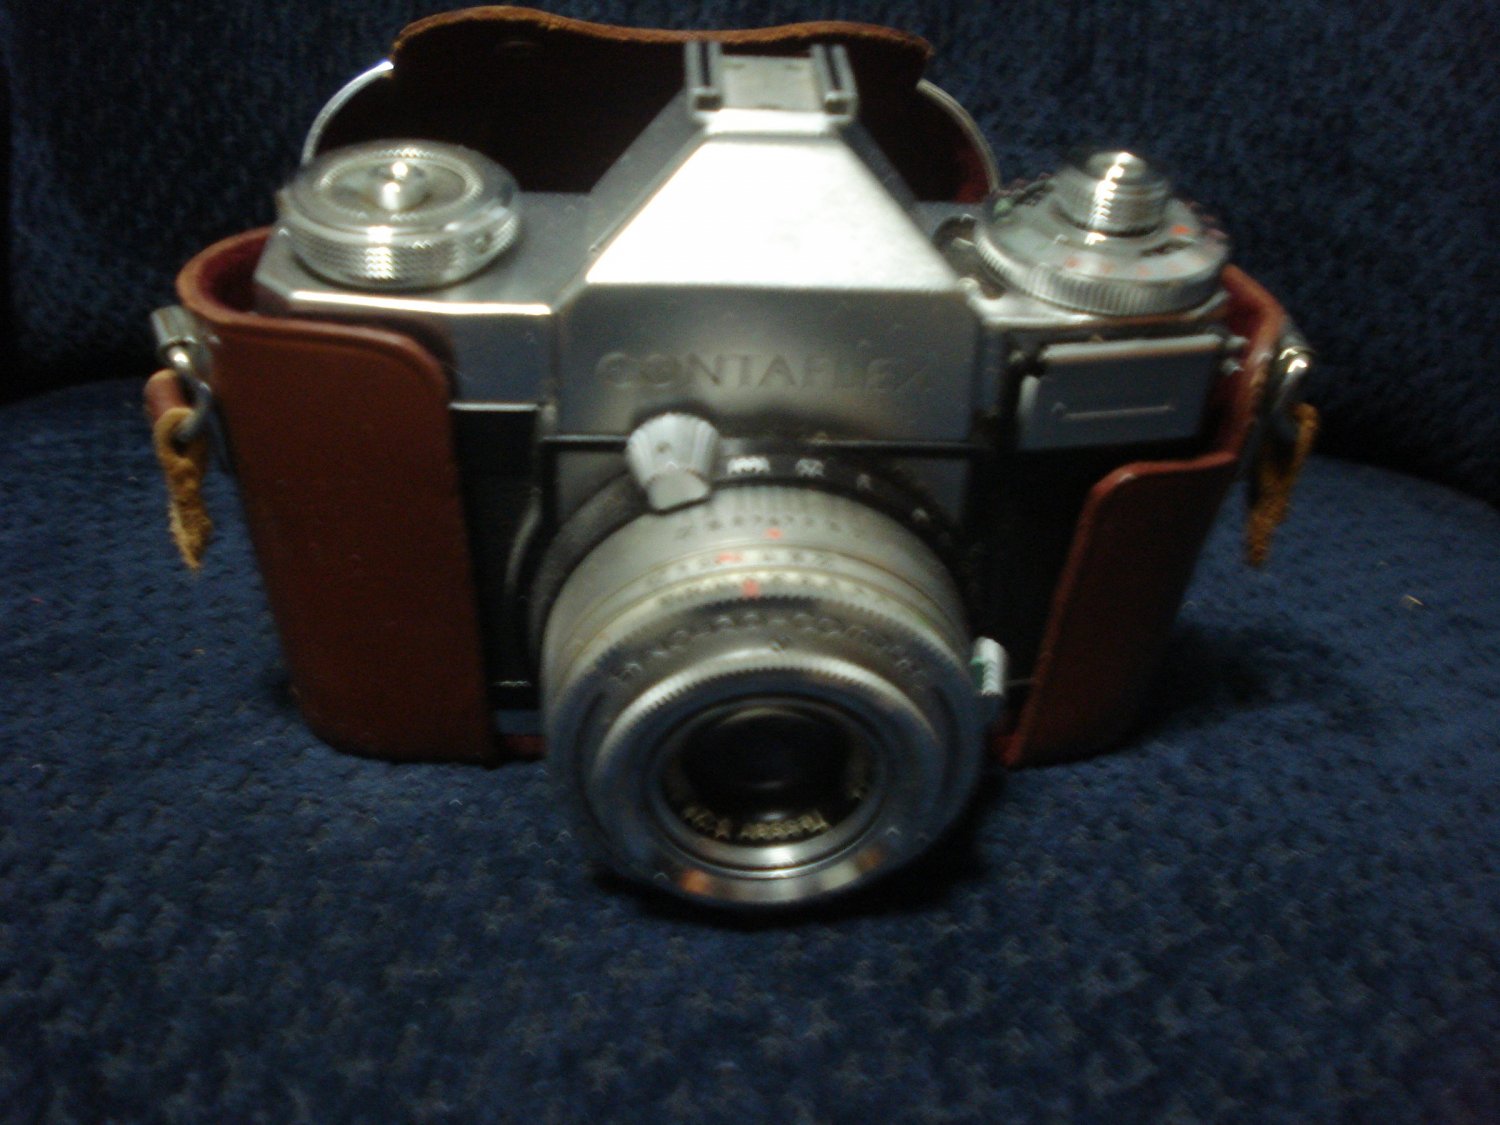 Zeiss Ikon 35 mm Contraflex Vintage Camera, made in Germany